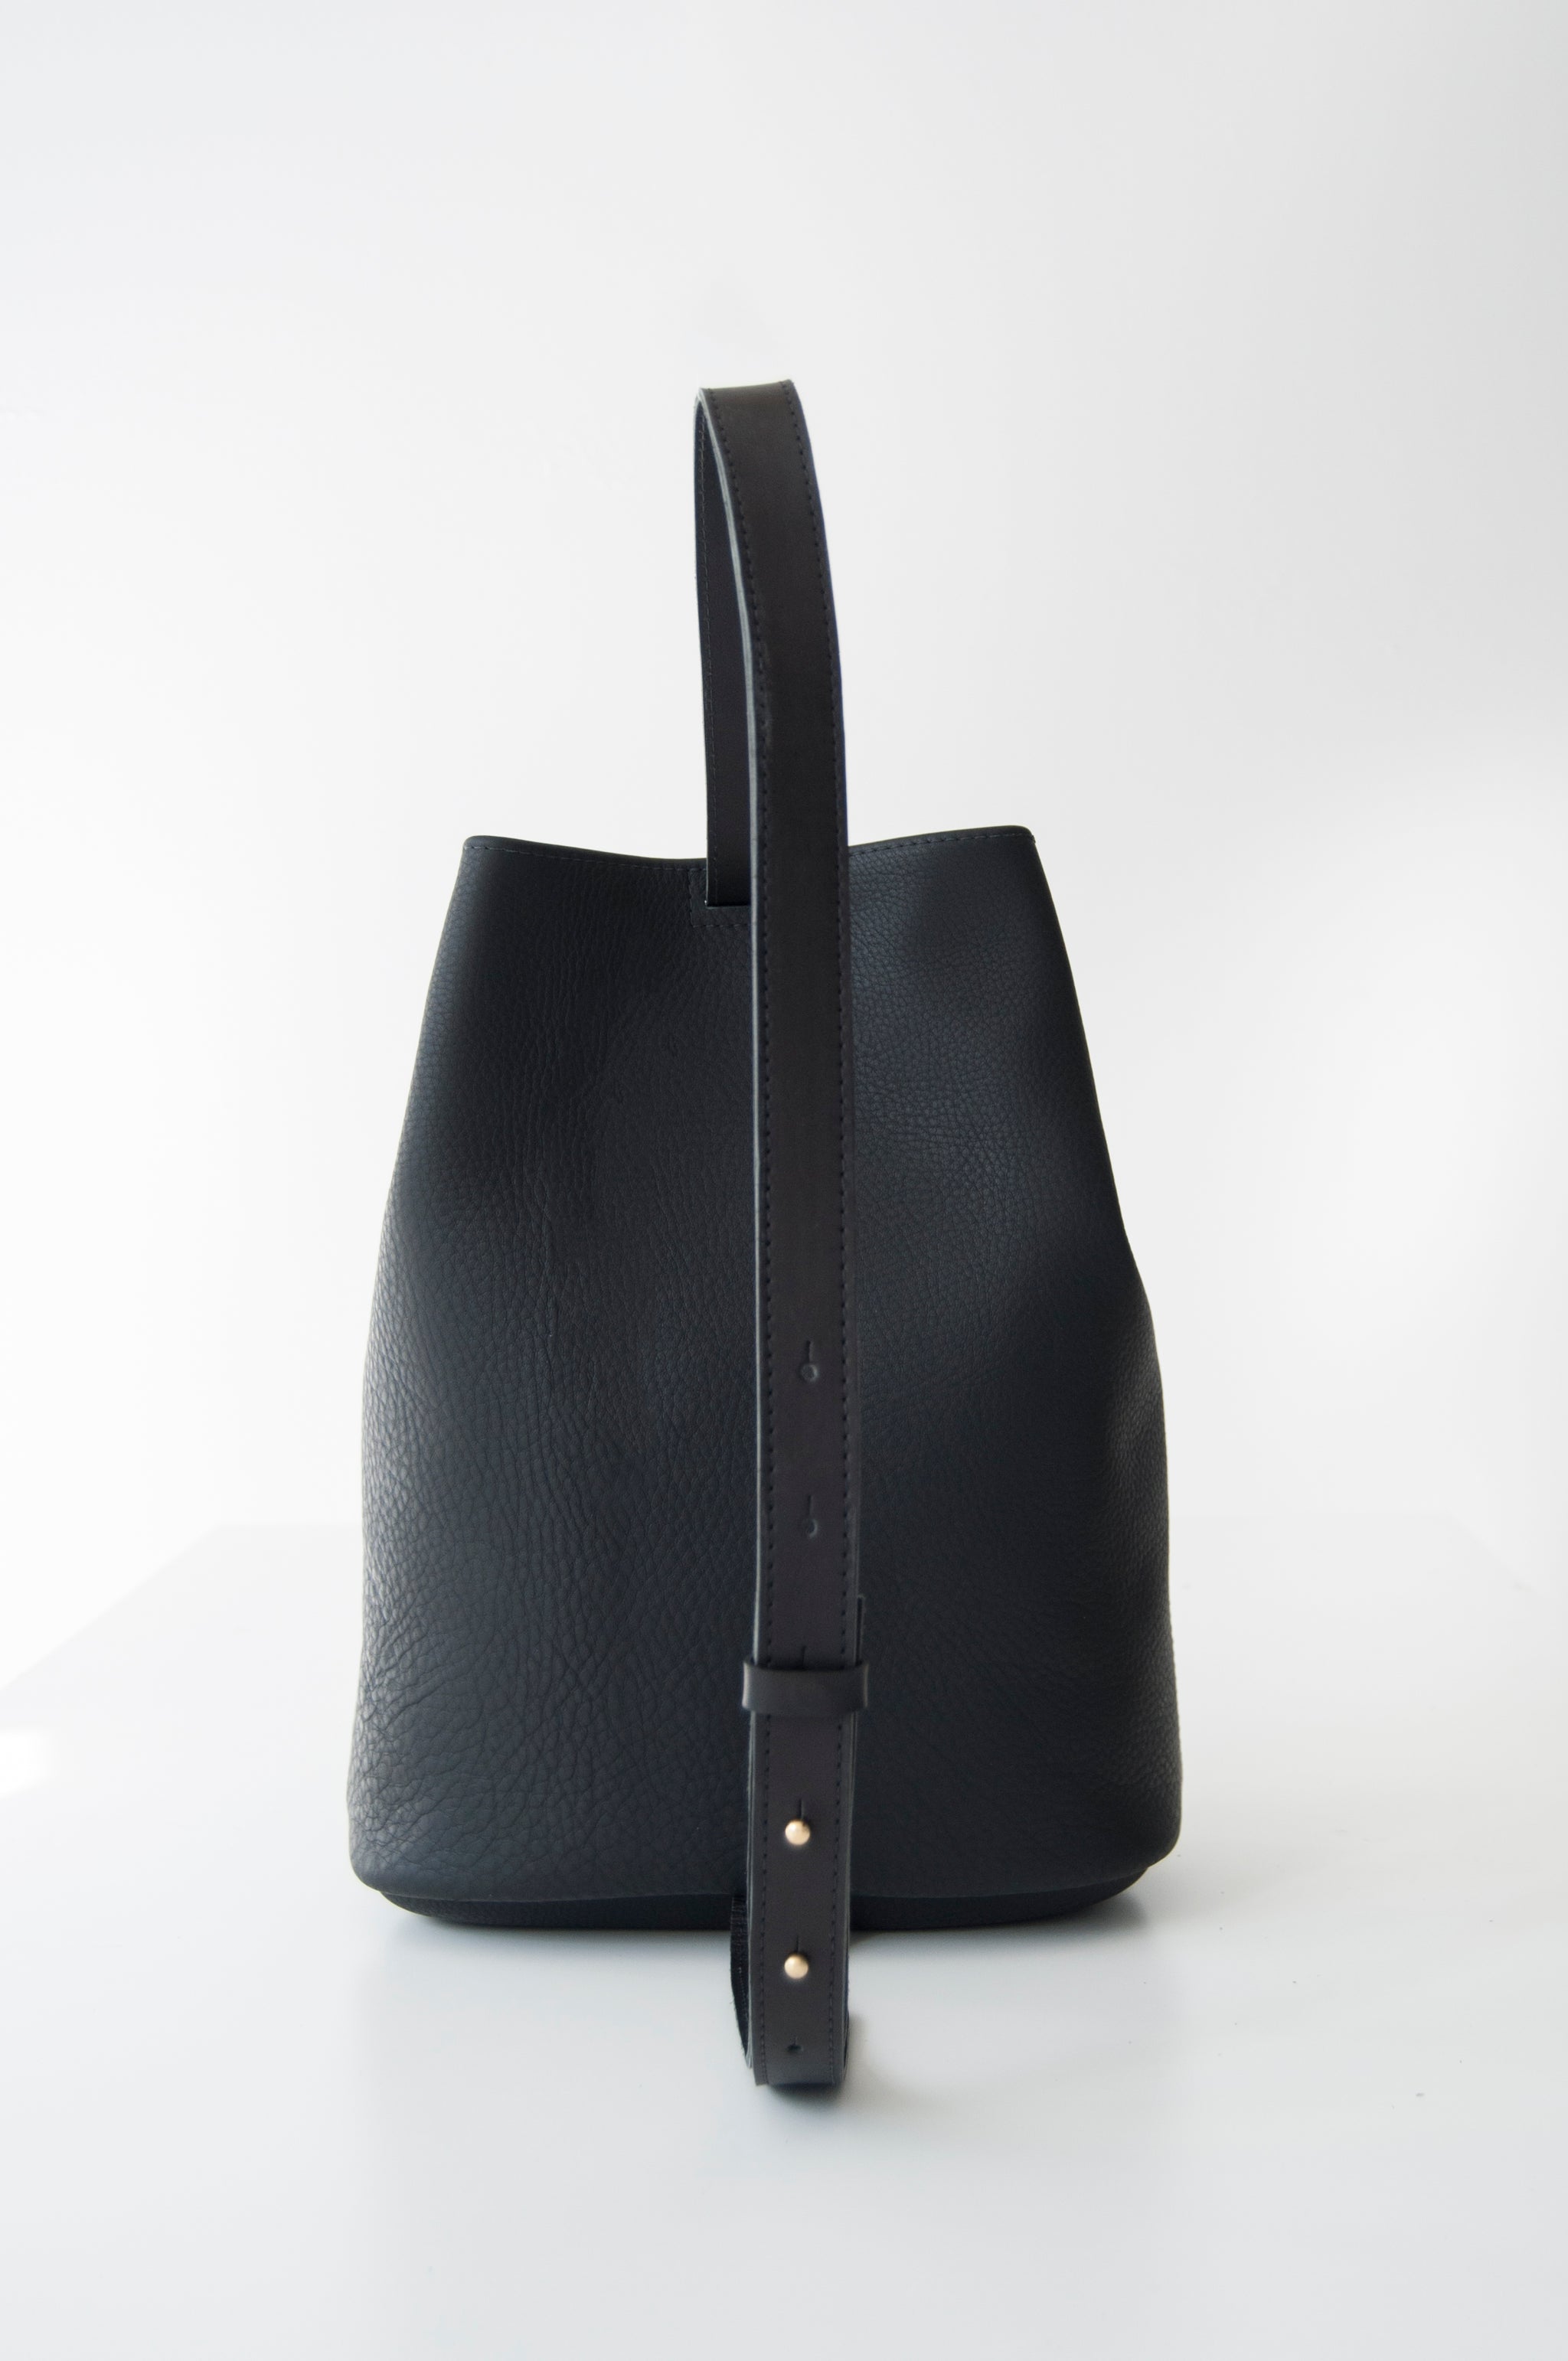 Chelli Harms Collection | shopCHC | Luxury handbags crafted in Chicago